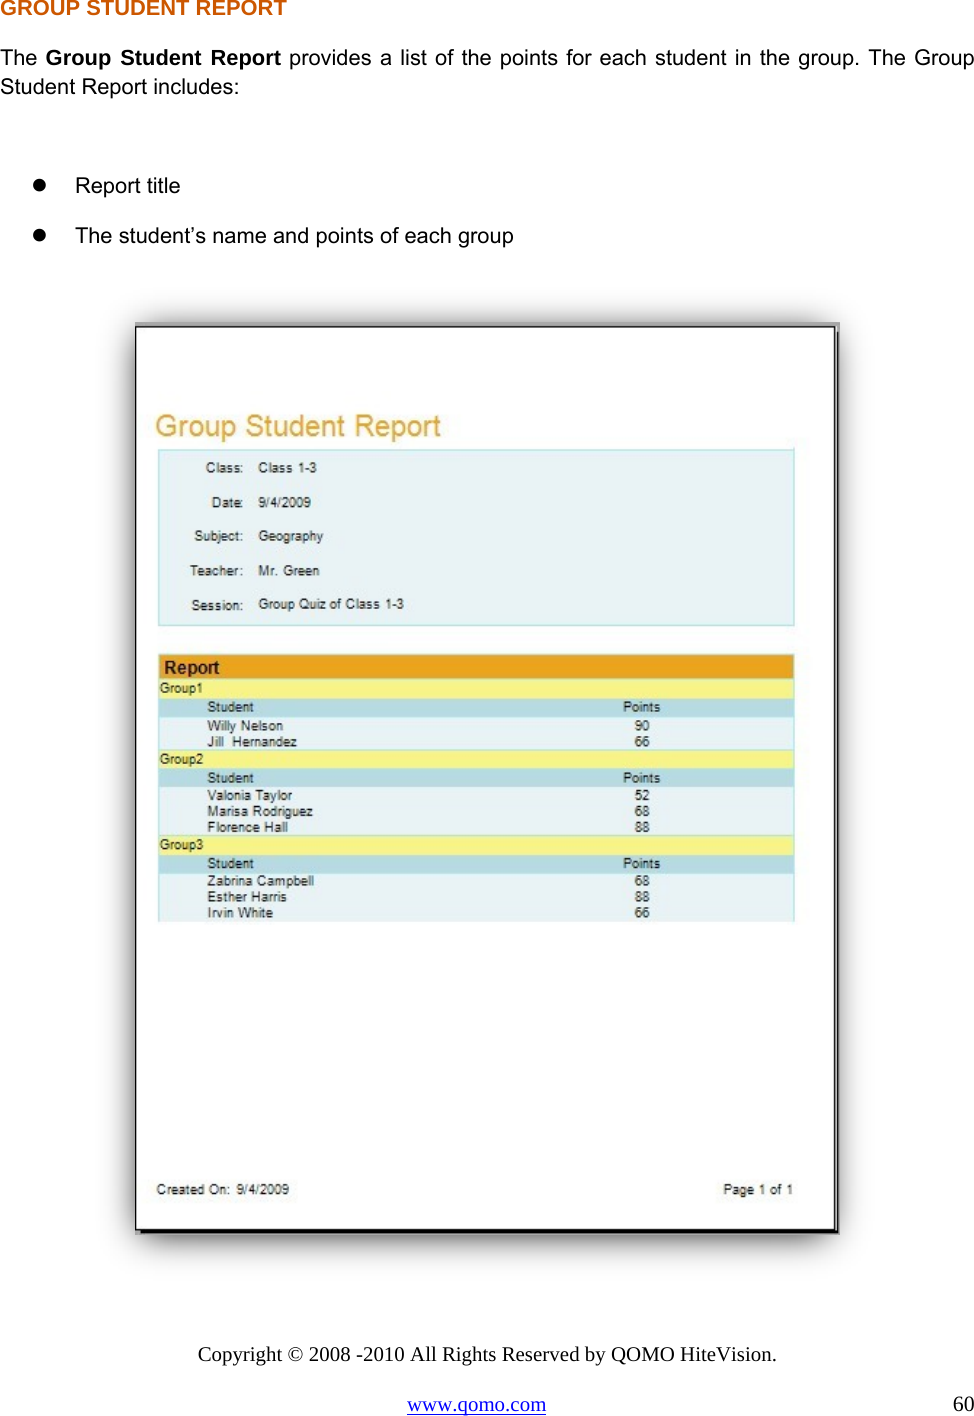 Copyright © 2008 -2010 All Rights Reserved by QOMO HiteVision. www.qomo.com                                                                          60 GROUP STUDENT REPORT  The Group Student Report provides a list of the points for each student in the group. The Group Student Report includes:    Report title   The student’s name and points of each group     